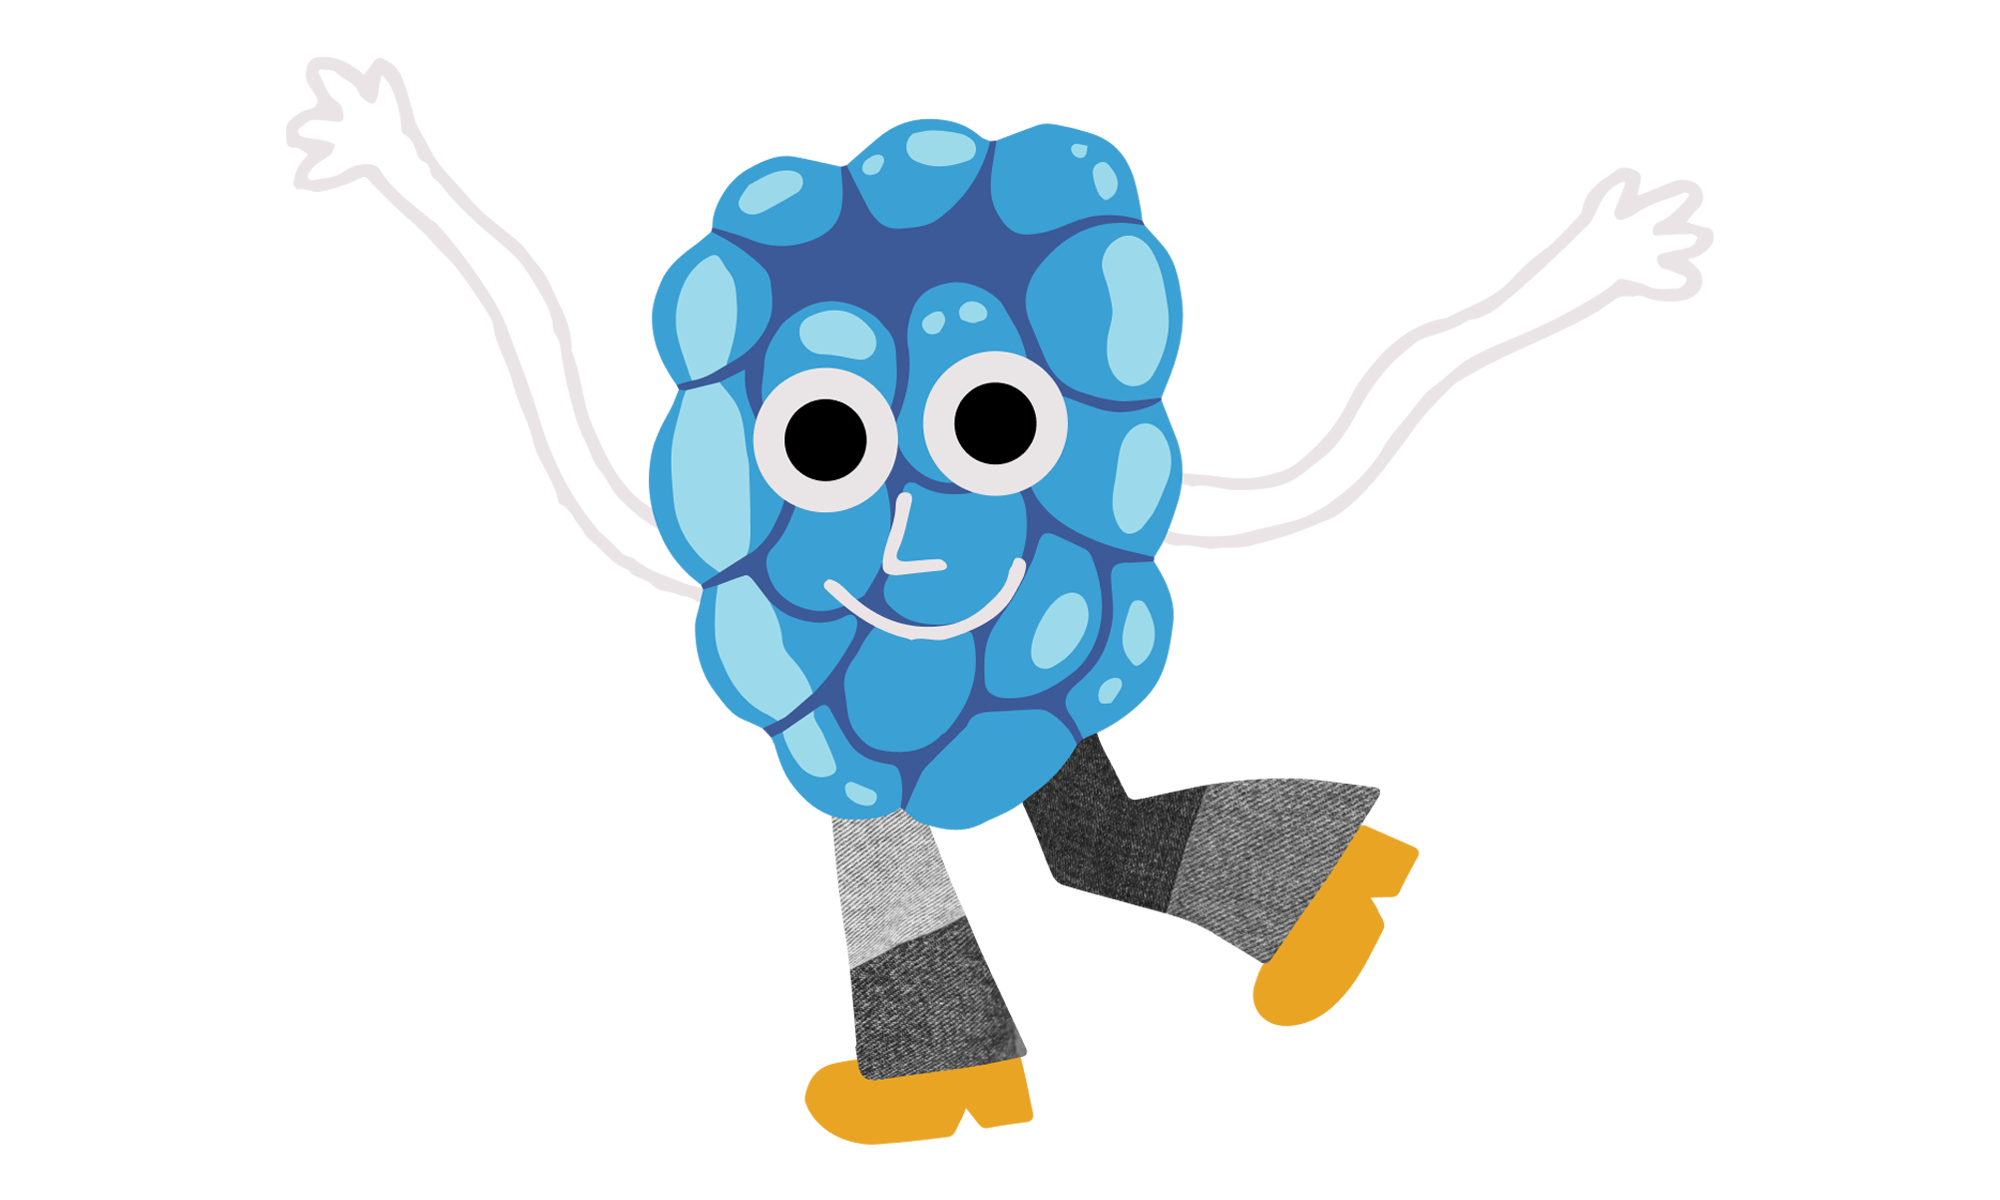 Cute blue raspberry graphic. Blue raspberry is waving arms in the air, smiling at the camera, and has its right foot kicked back.